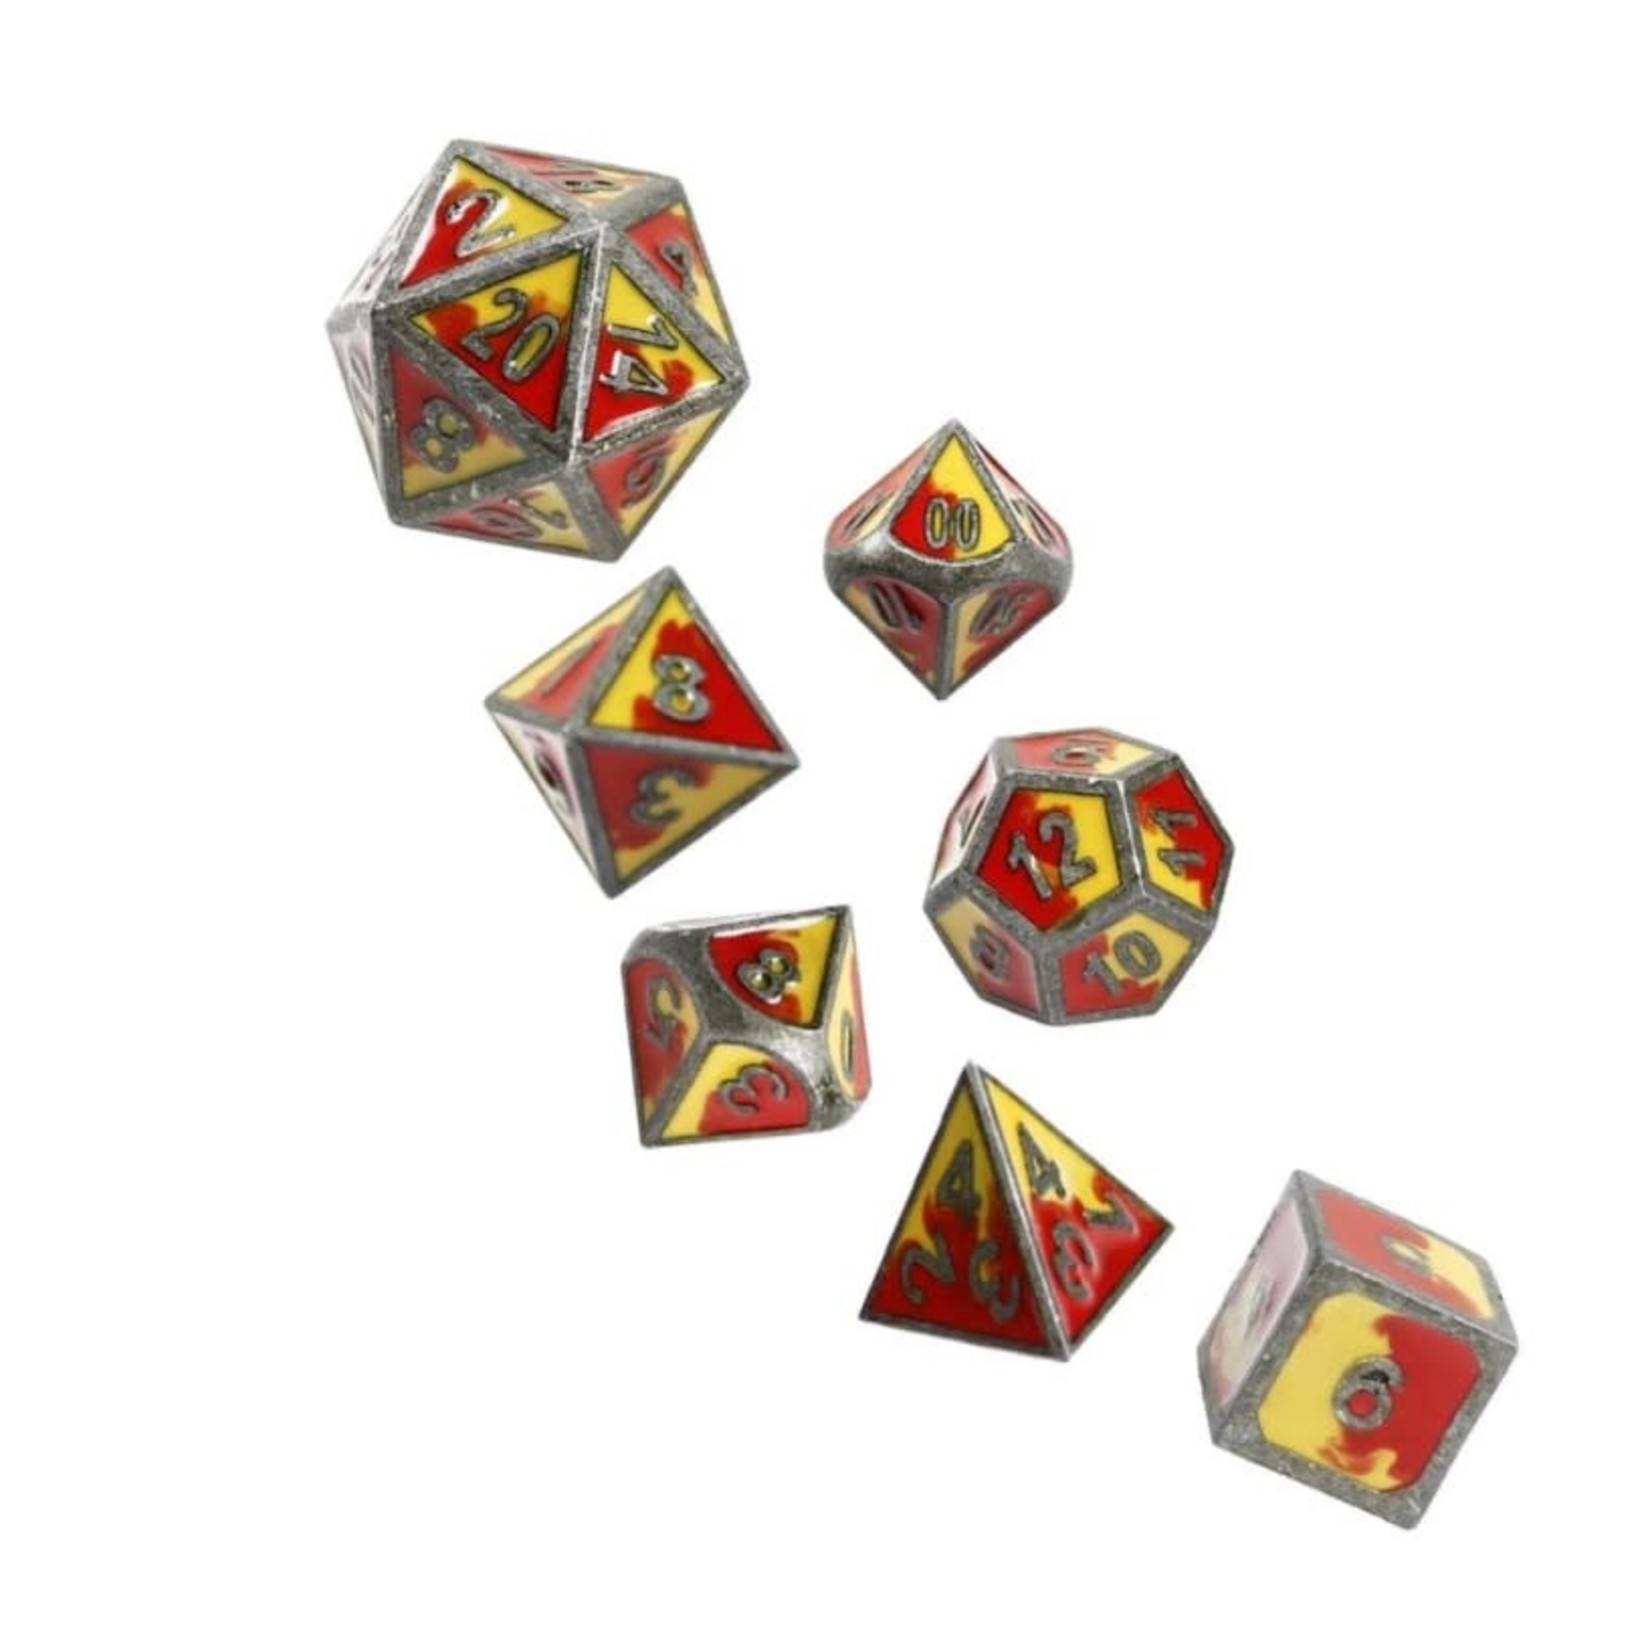 Forged Gaming Set of 7 Metal Dice: Fire & Forge